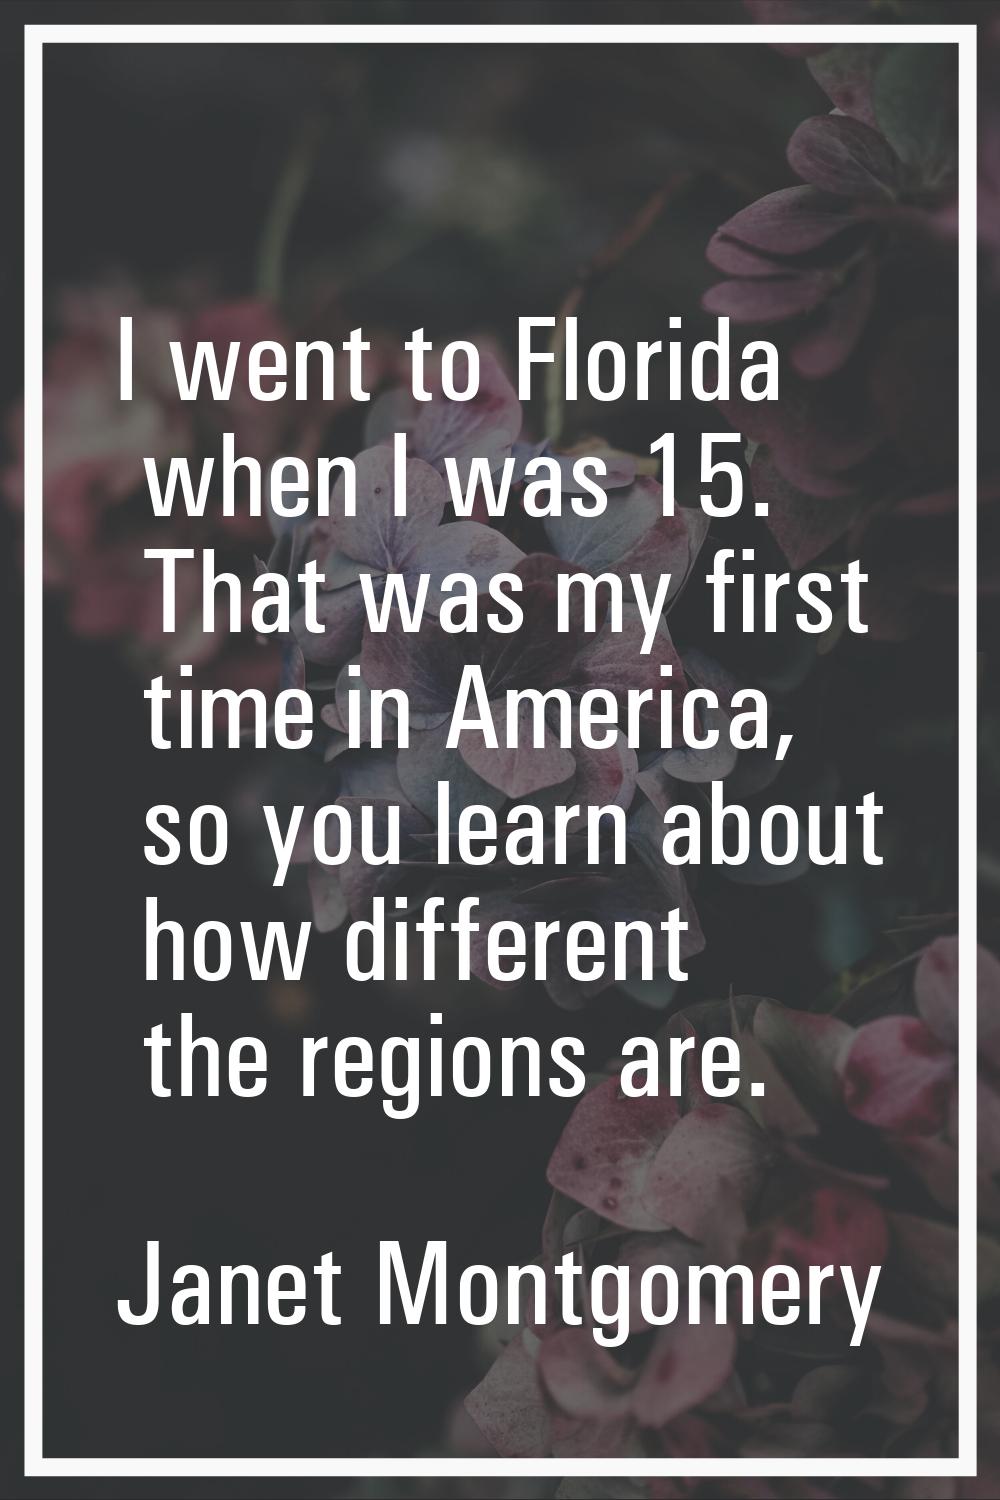 I went to Florida when I was 15. That was my first time in America, so you learn about how differen